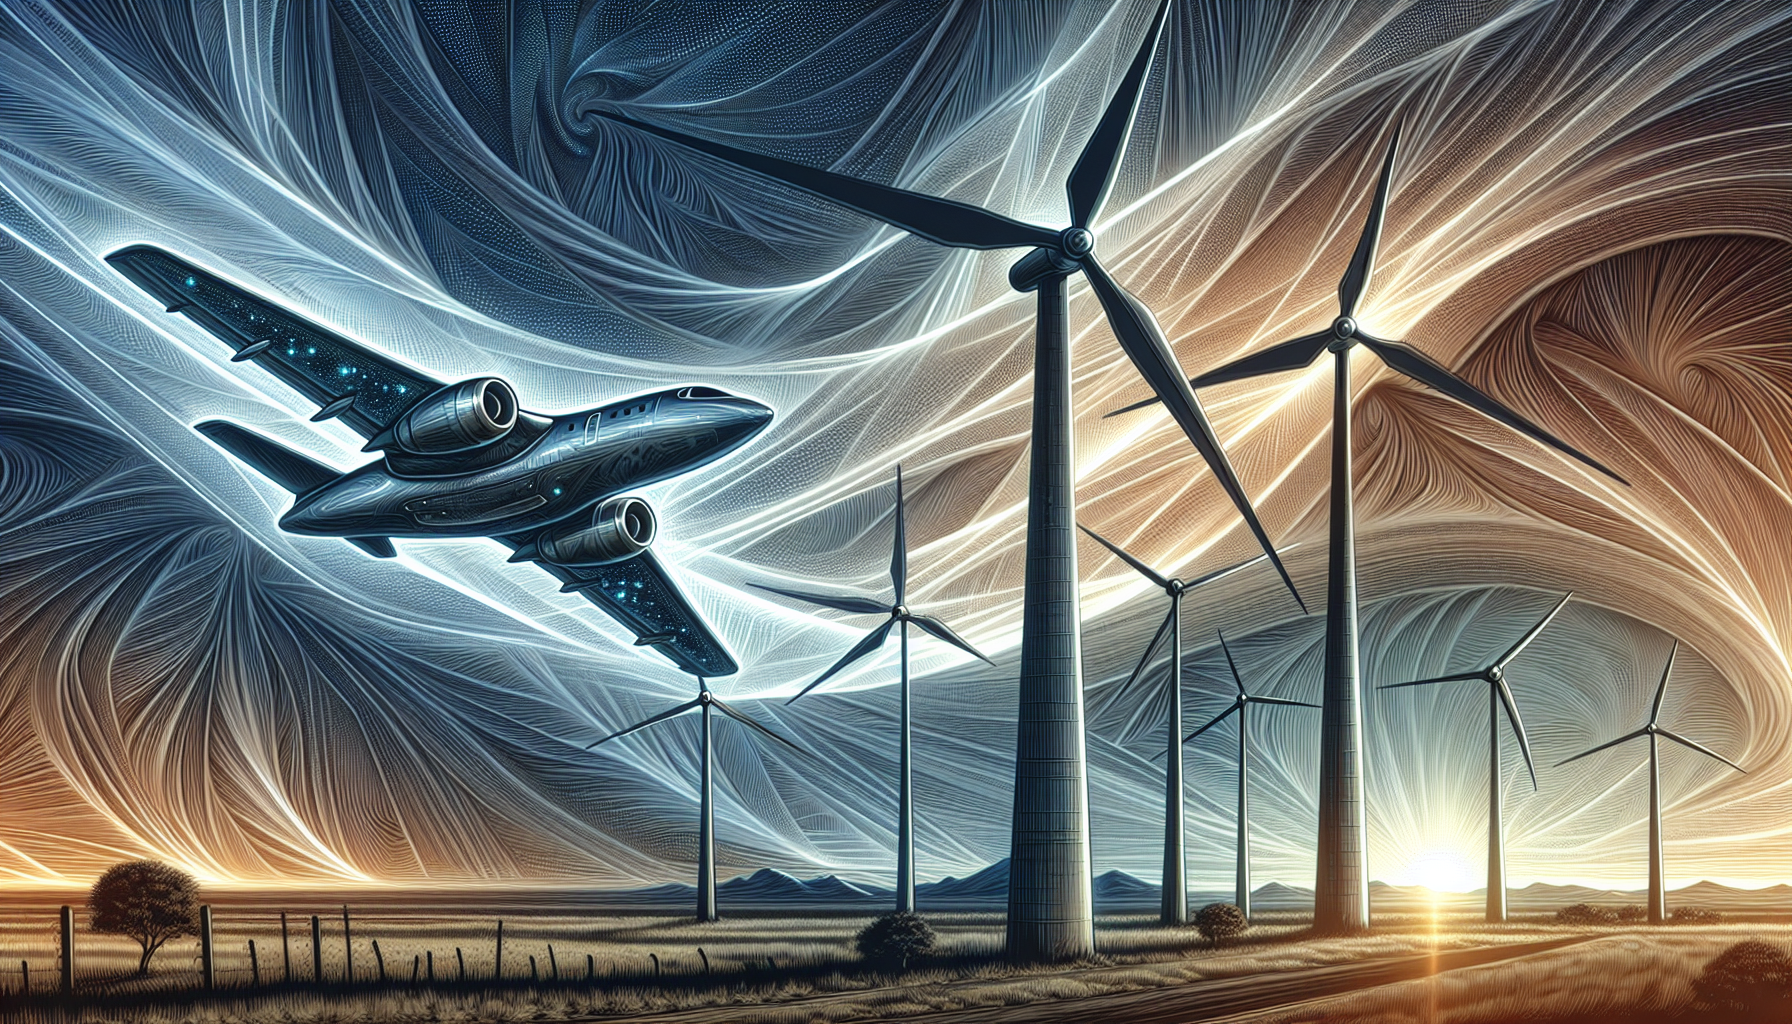 Aerospace and Wind Energy Convergence – Trends and Technology